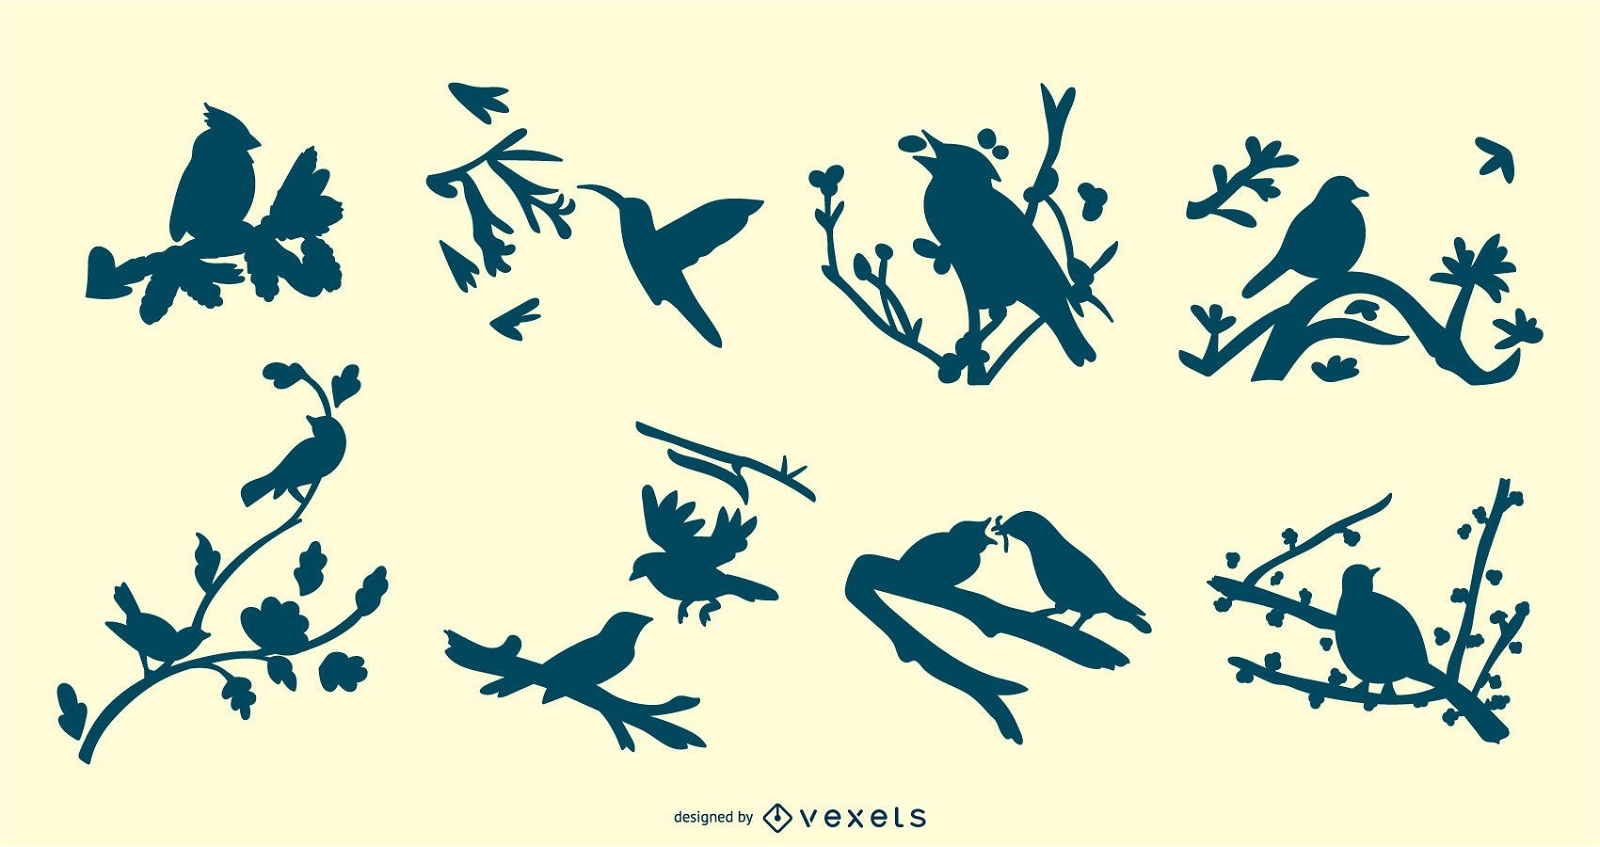 Birds on Tree Branches Silhouette Set